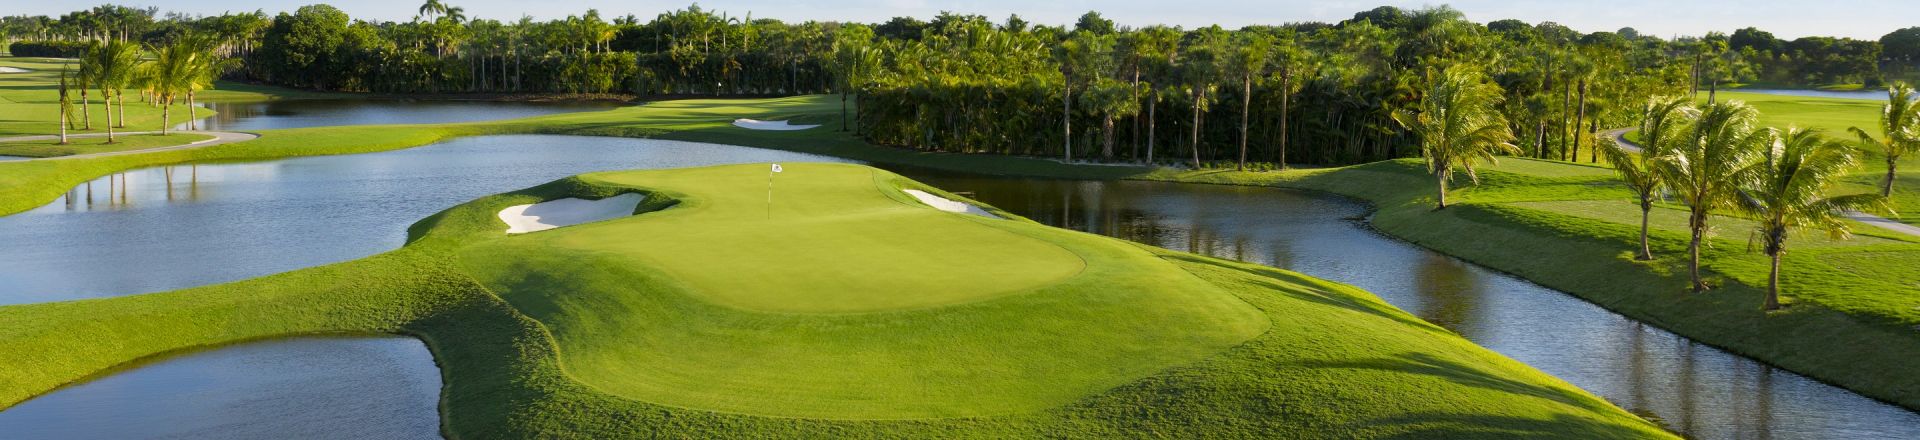 Play golf in Florida at Red Tiger Golf Course, Trump National Doral